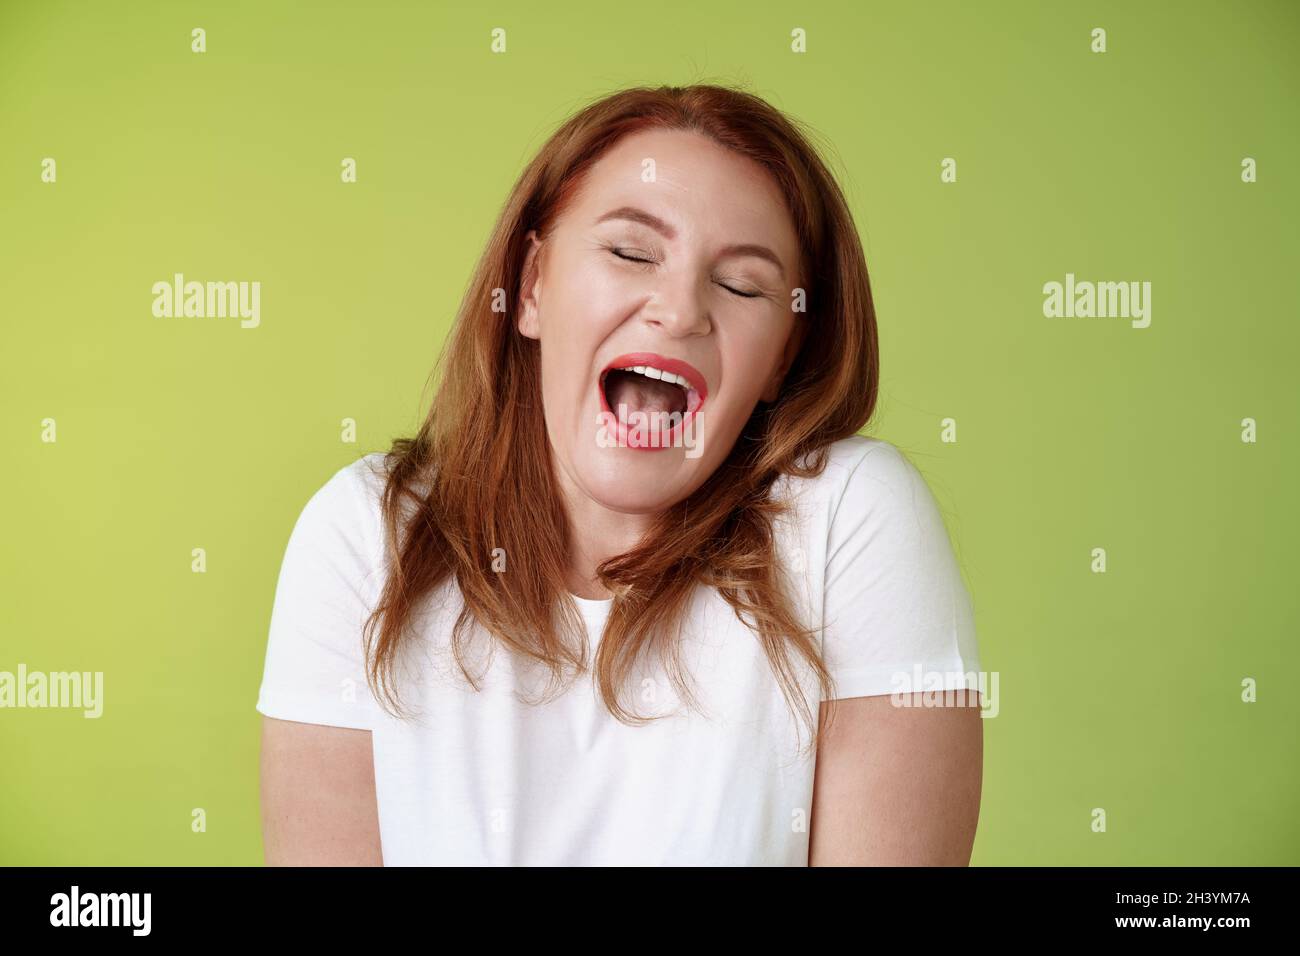 Lazy weekends finally time sleep. Cheerful redhead middle-aged 50s woman yawning satisfied close eyes feel sleepy wake up early Stock Photo